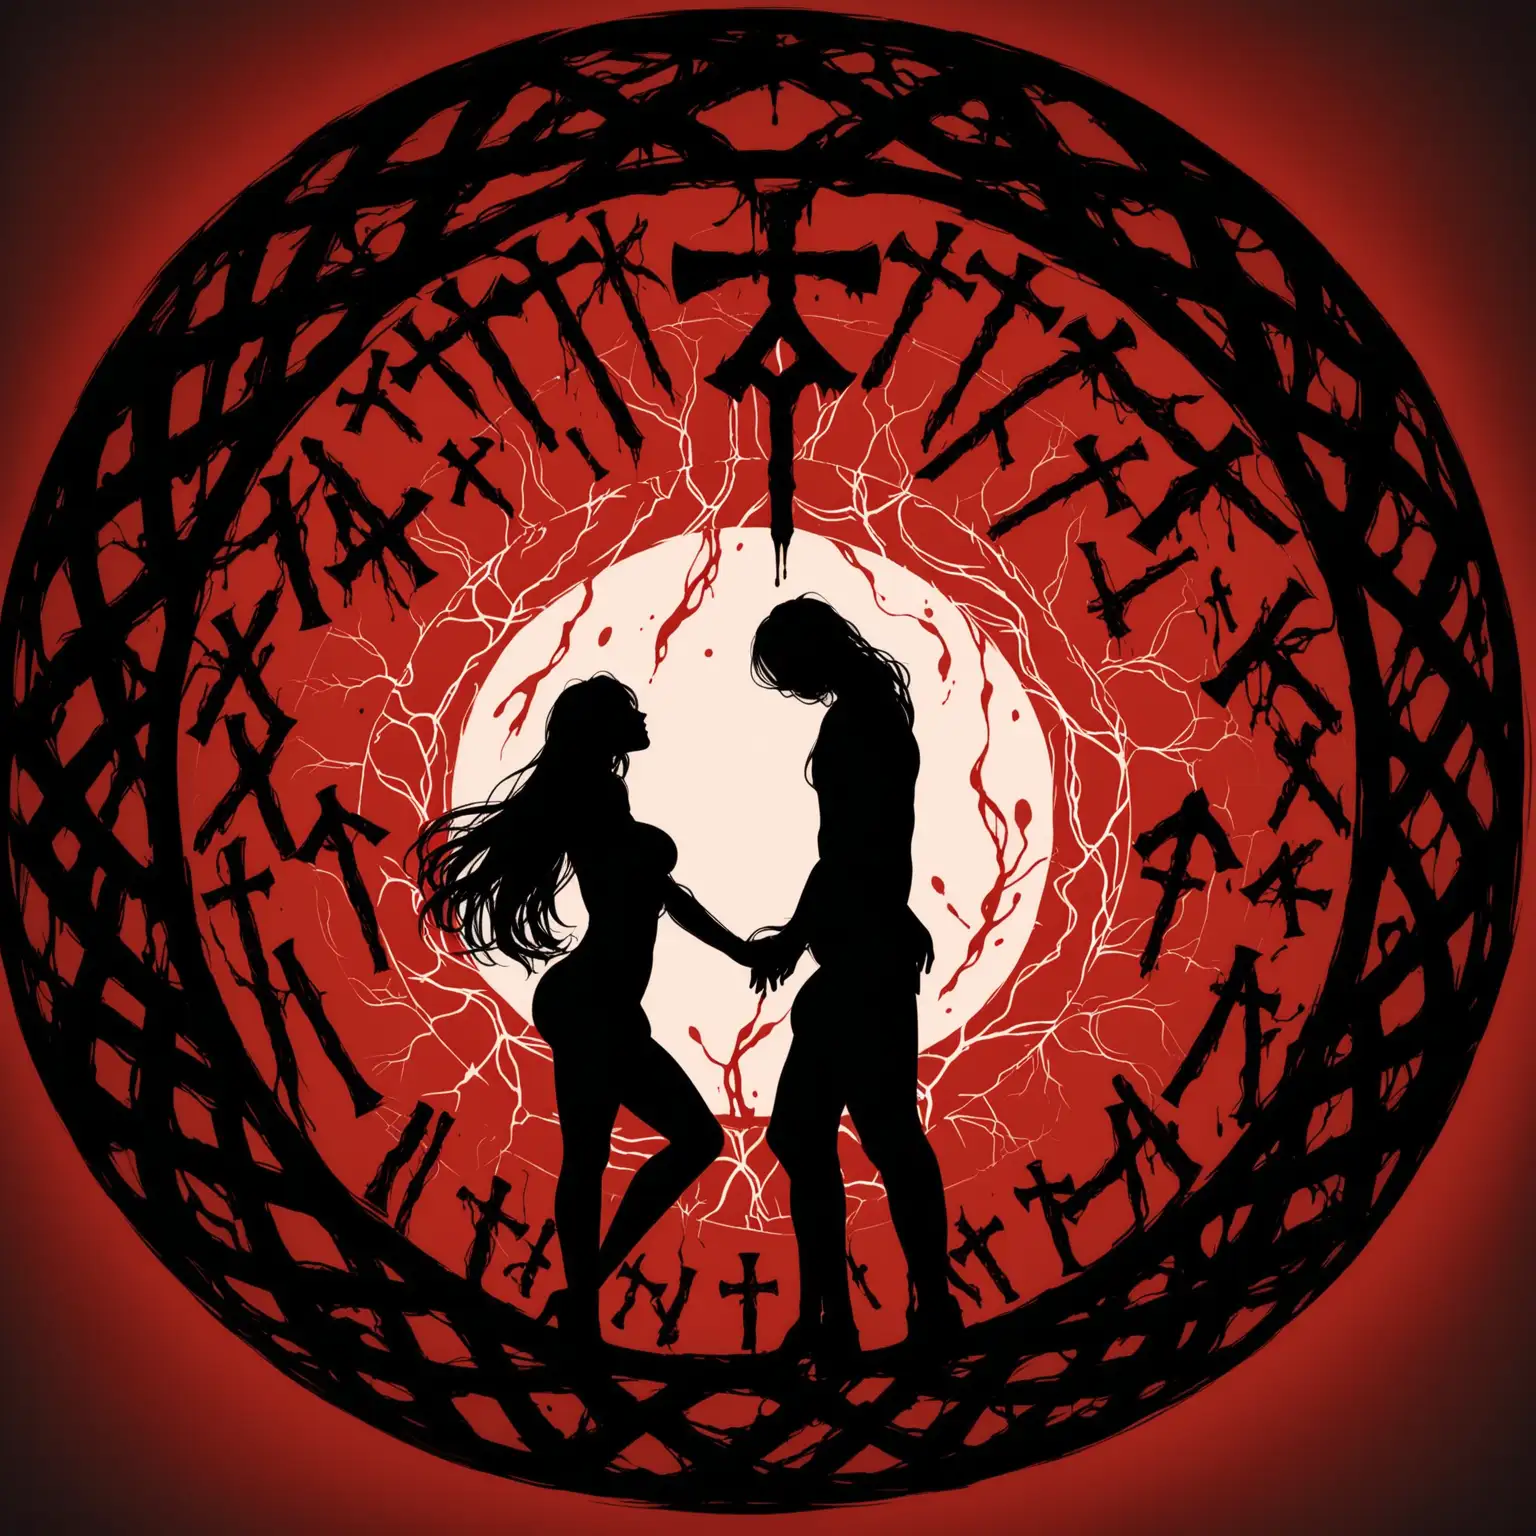 Enigmatic Circle of Runes Passionate Silhouettes and Blood Veins